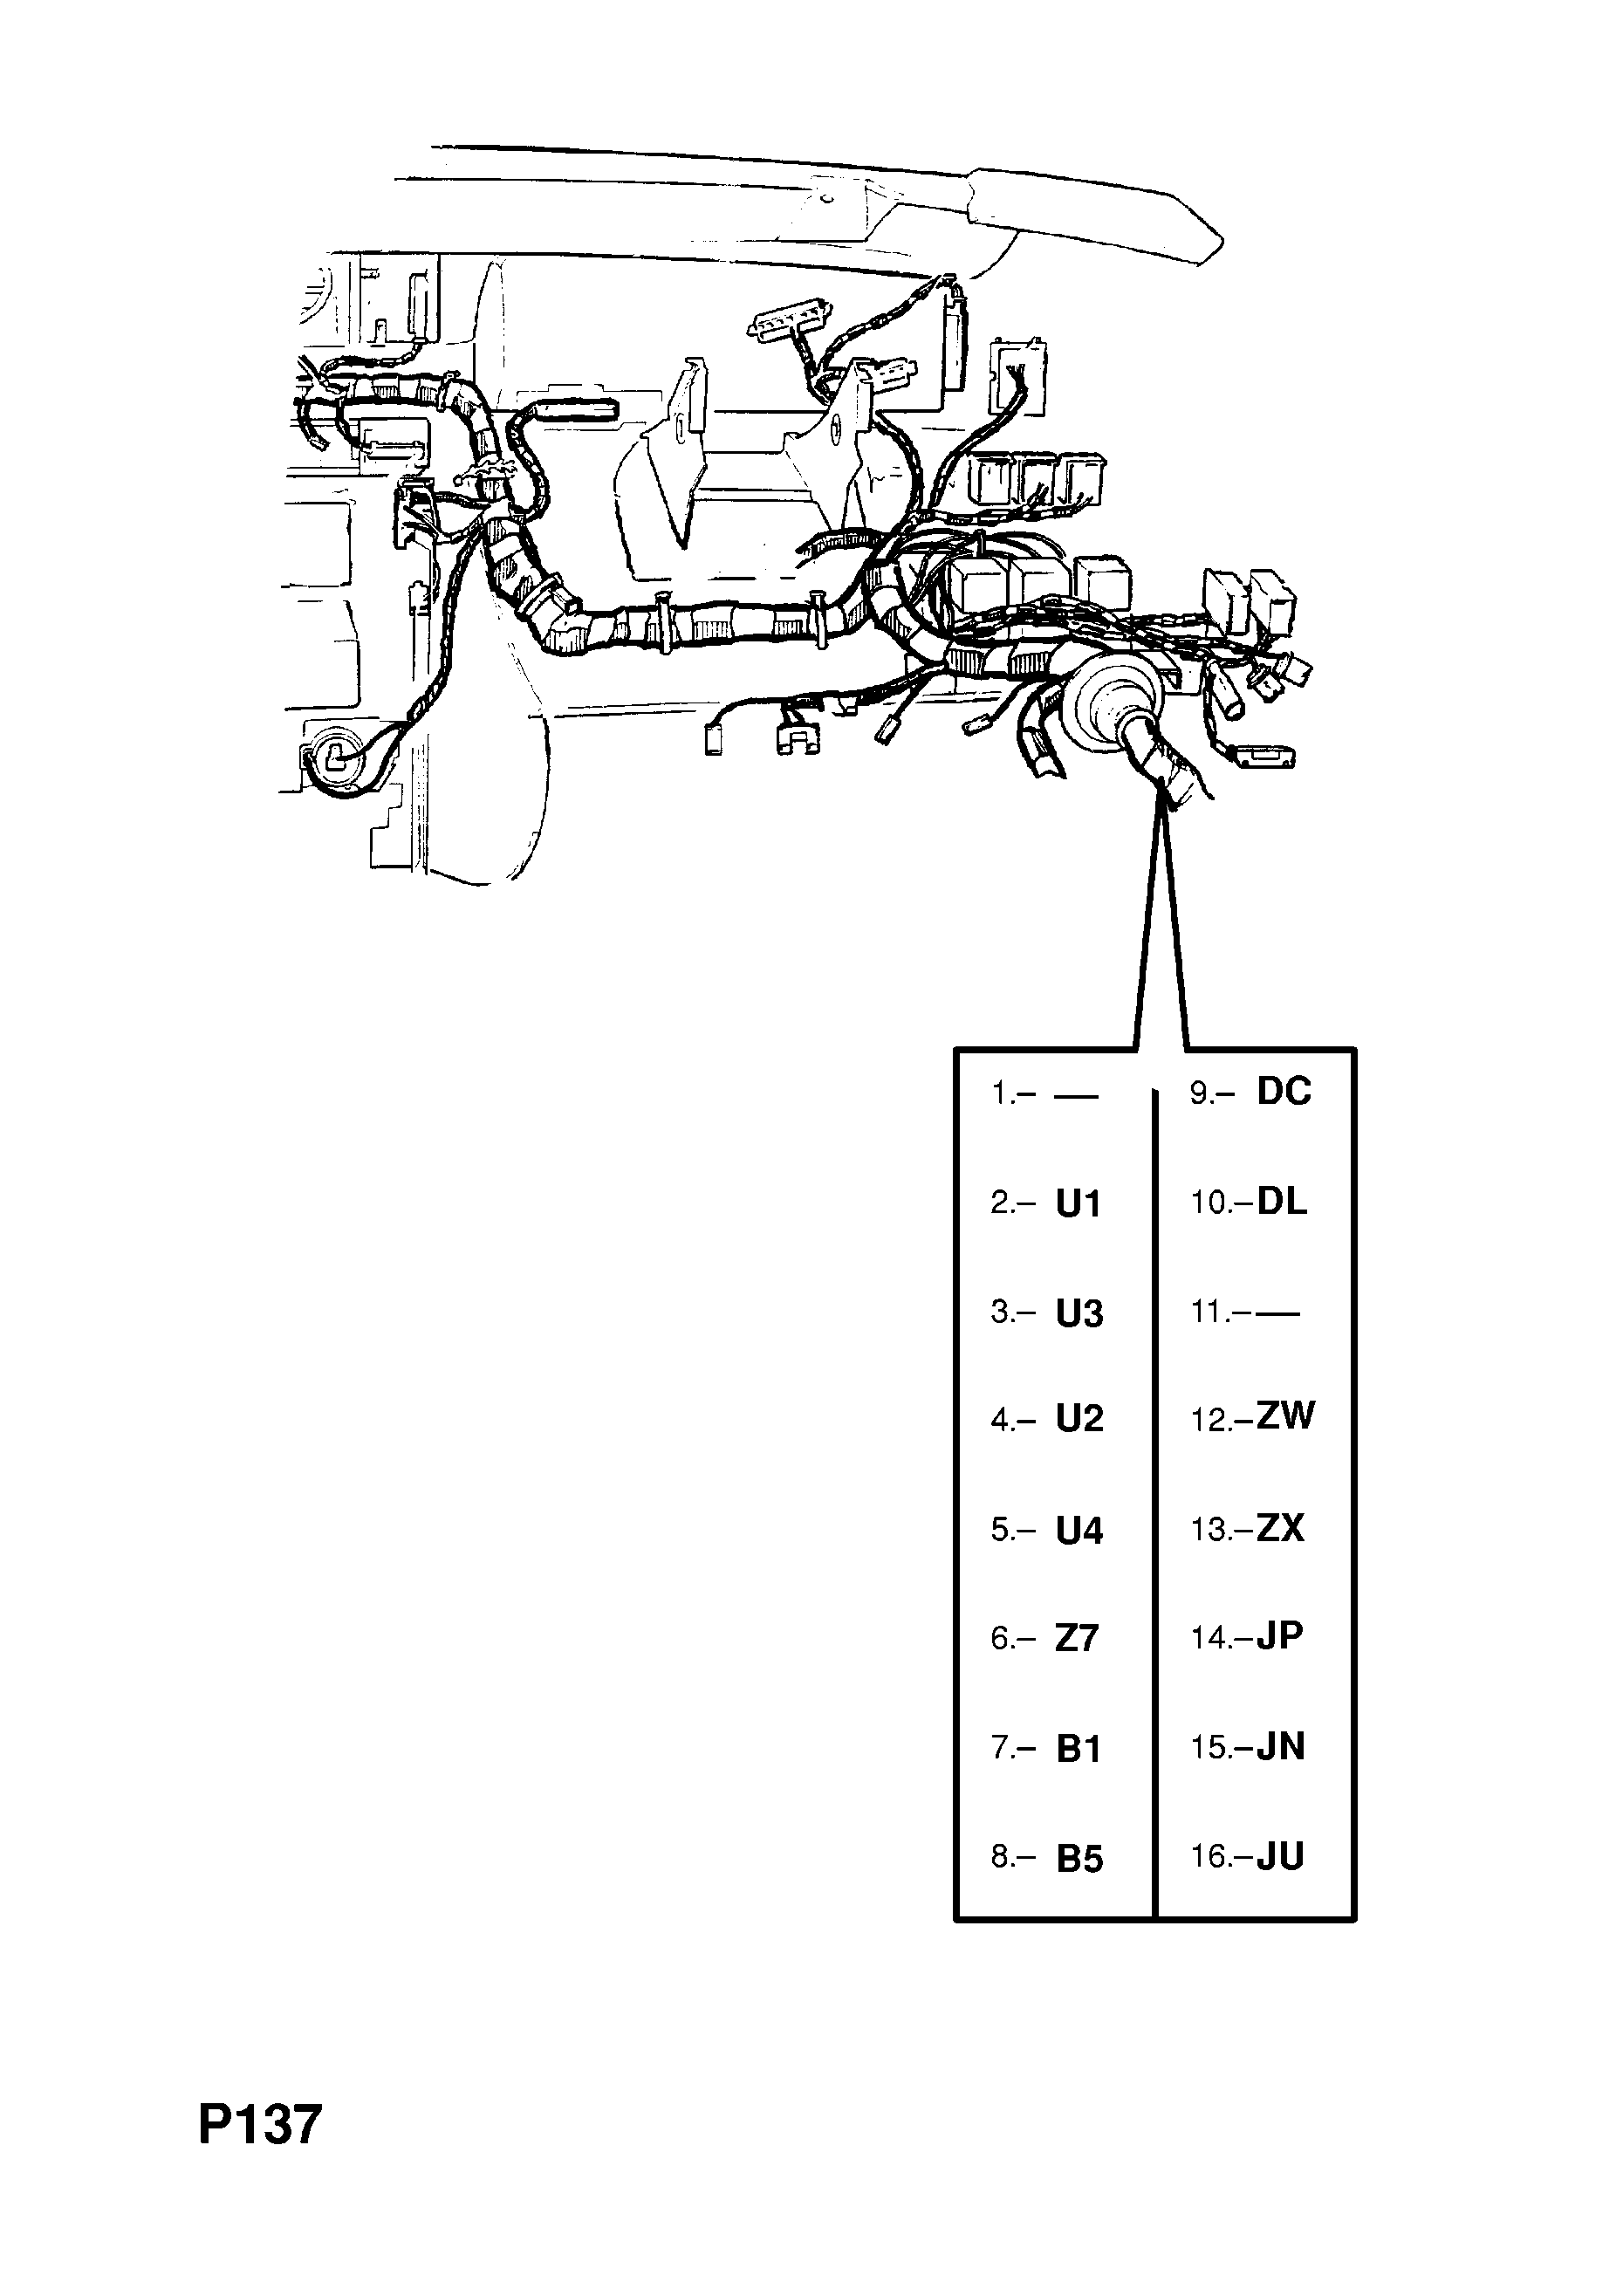 INSTRUMENT PANEL WIRING HARNESS (CONTD.) <small><i>[H1000001-L1999999 FOR AUTOMATIC TRANSMISSION EXCEPT AIR CONDITIONING AND LCD INSTRUMENTS]</i></small>